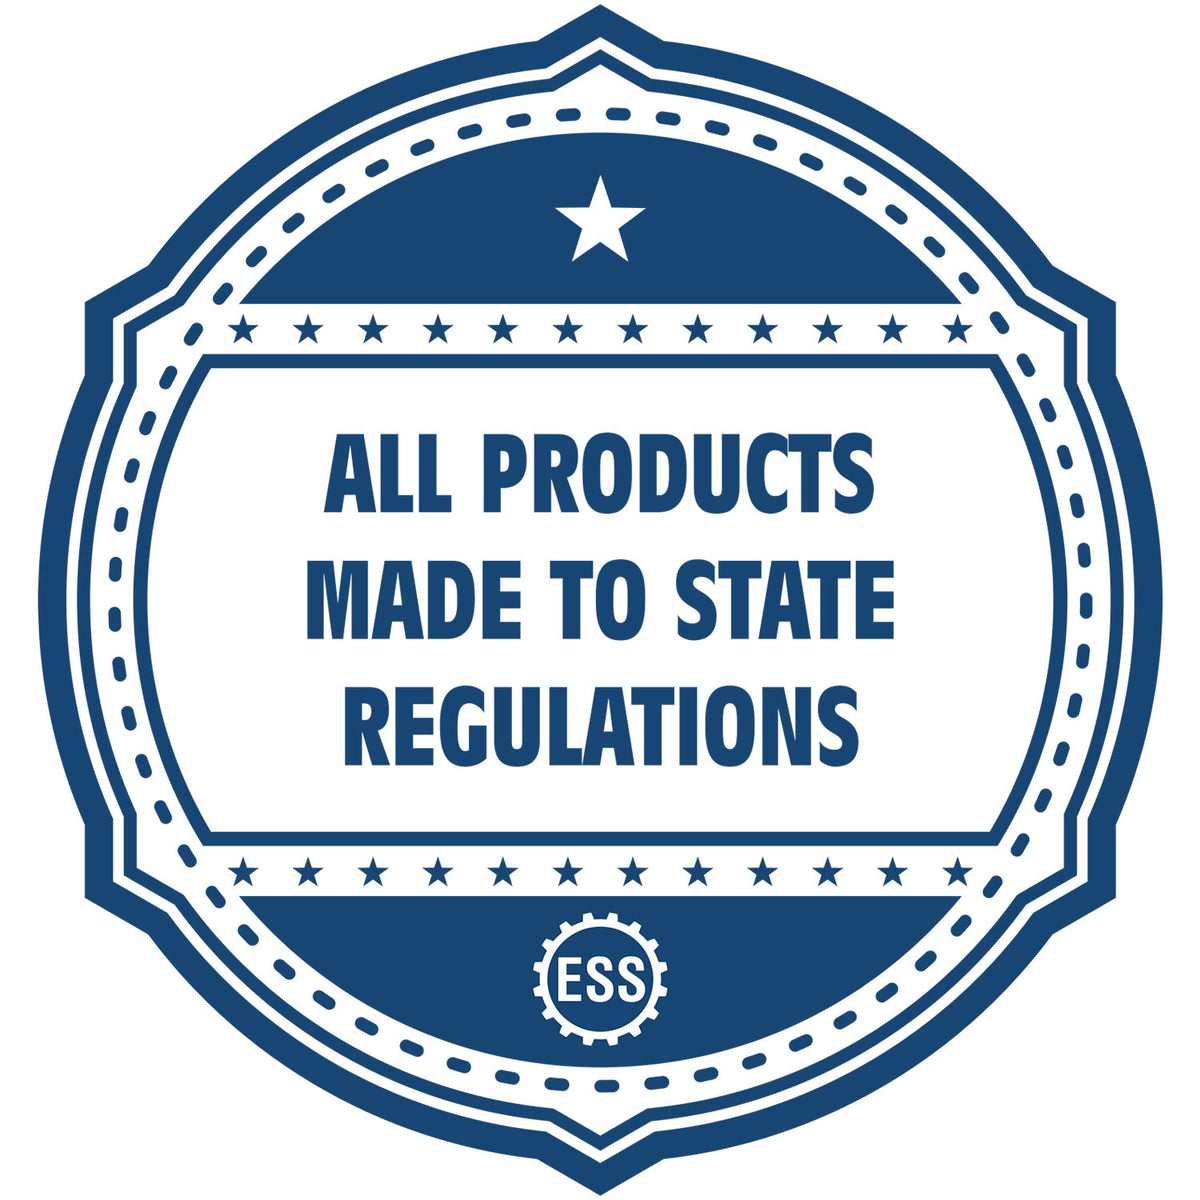 An icon or badge element for the Handheld Tennessee Architect Seal Embosser showing that this product is made in compliance with state regulations.